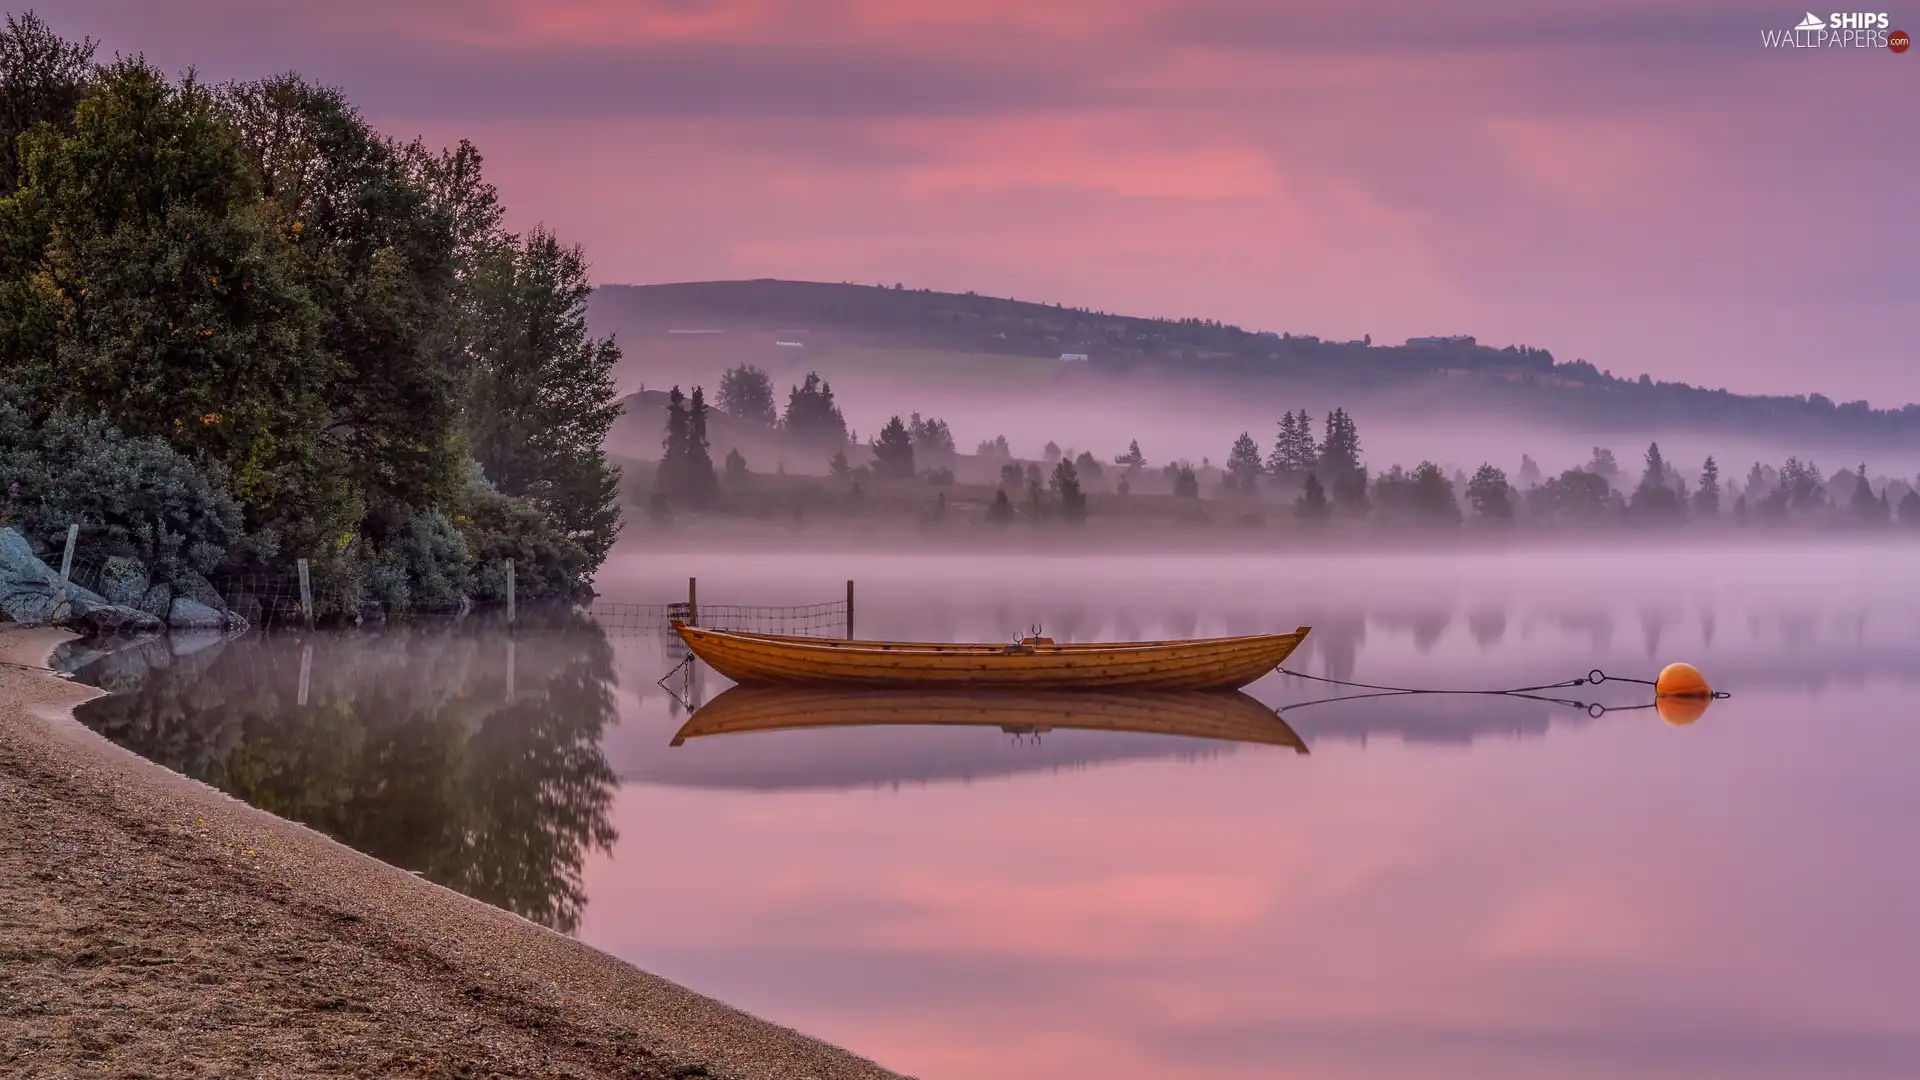 Fog, lake, viewes, The Hills, trees, Boat